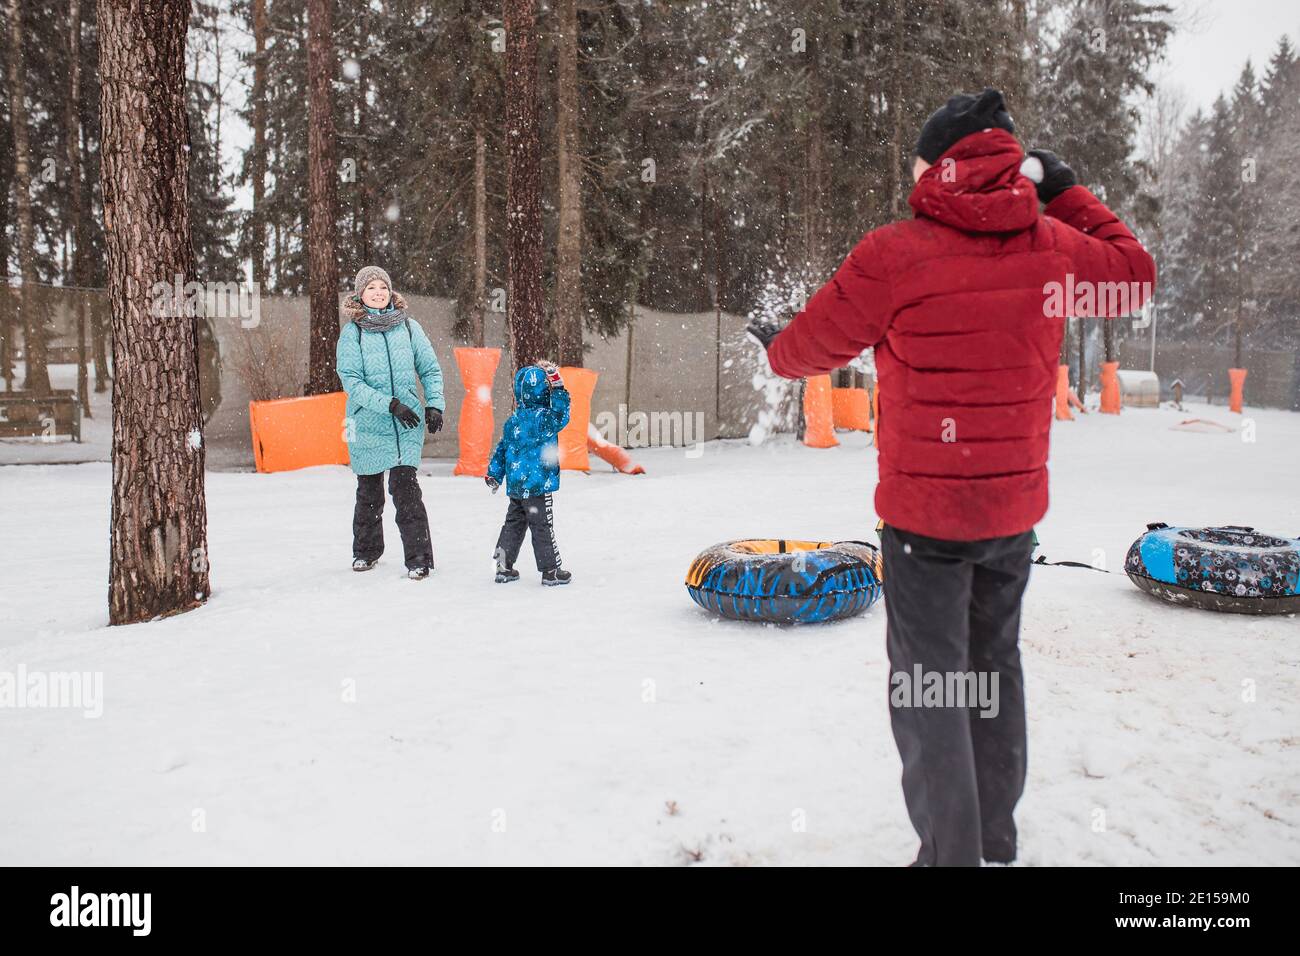 Minsk, Belarus - December 03, 2020: Friendly family playing snowballs in a snowy forest - mom dad and child are having fun on christmas holidays Stock Photo